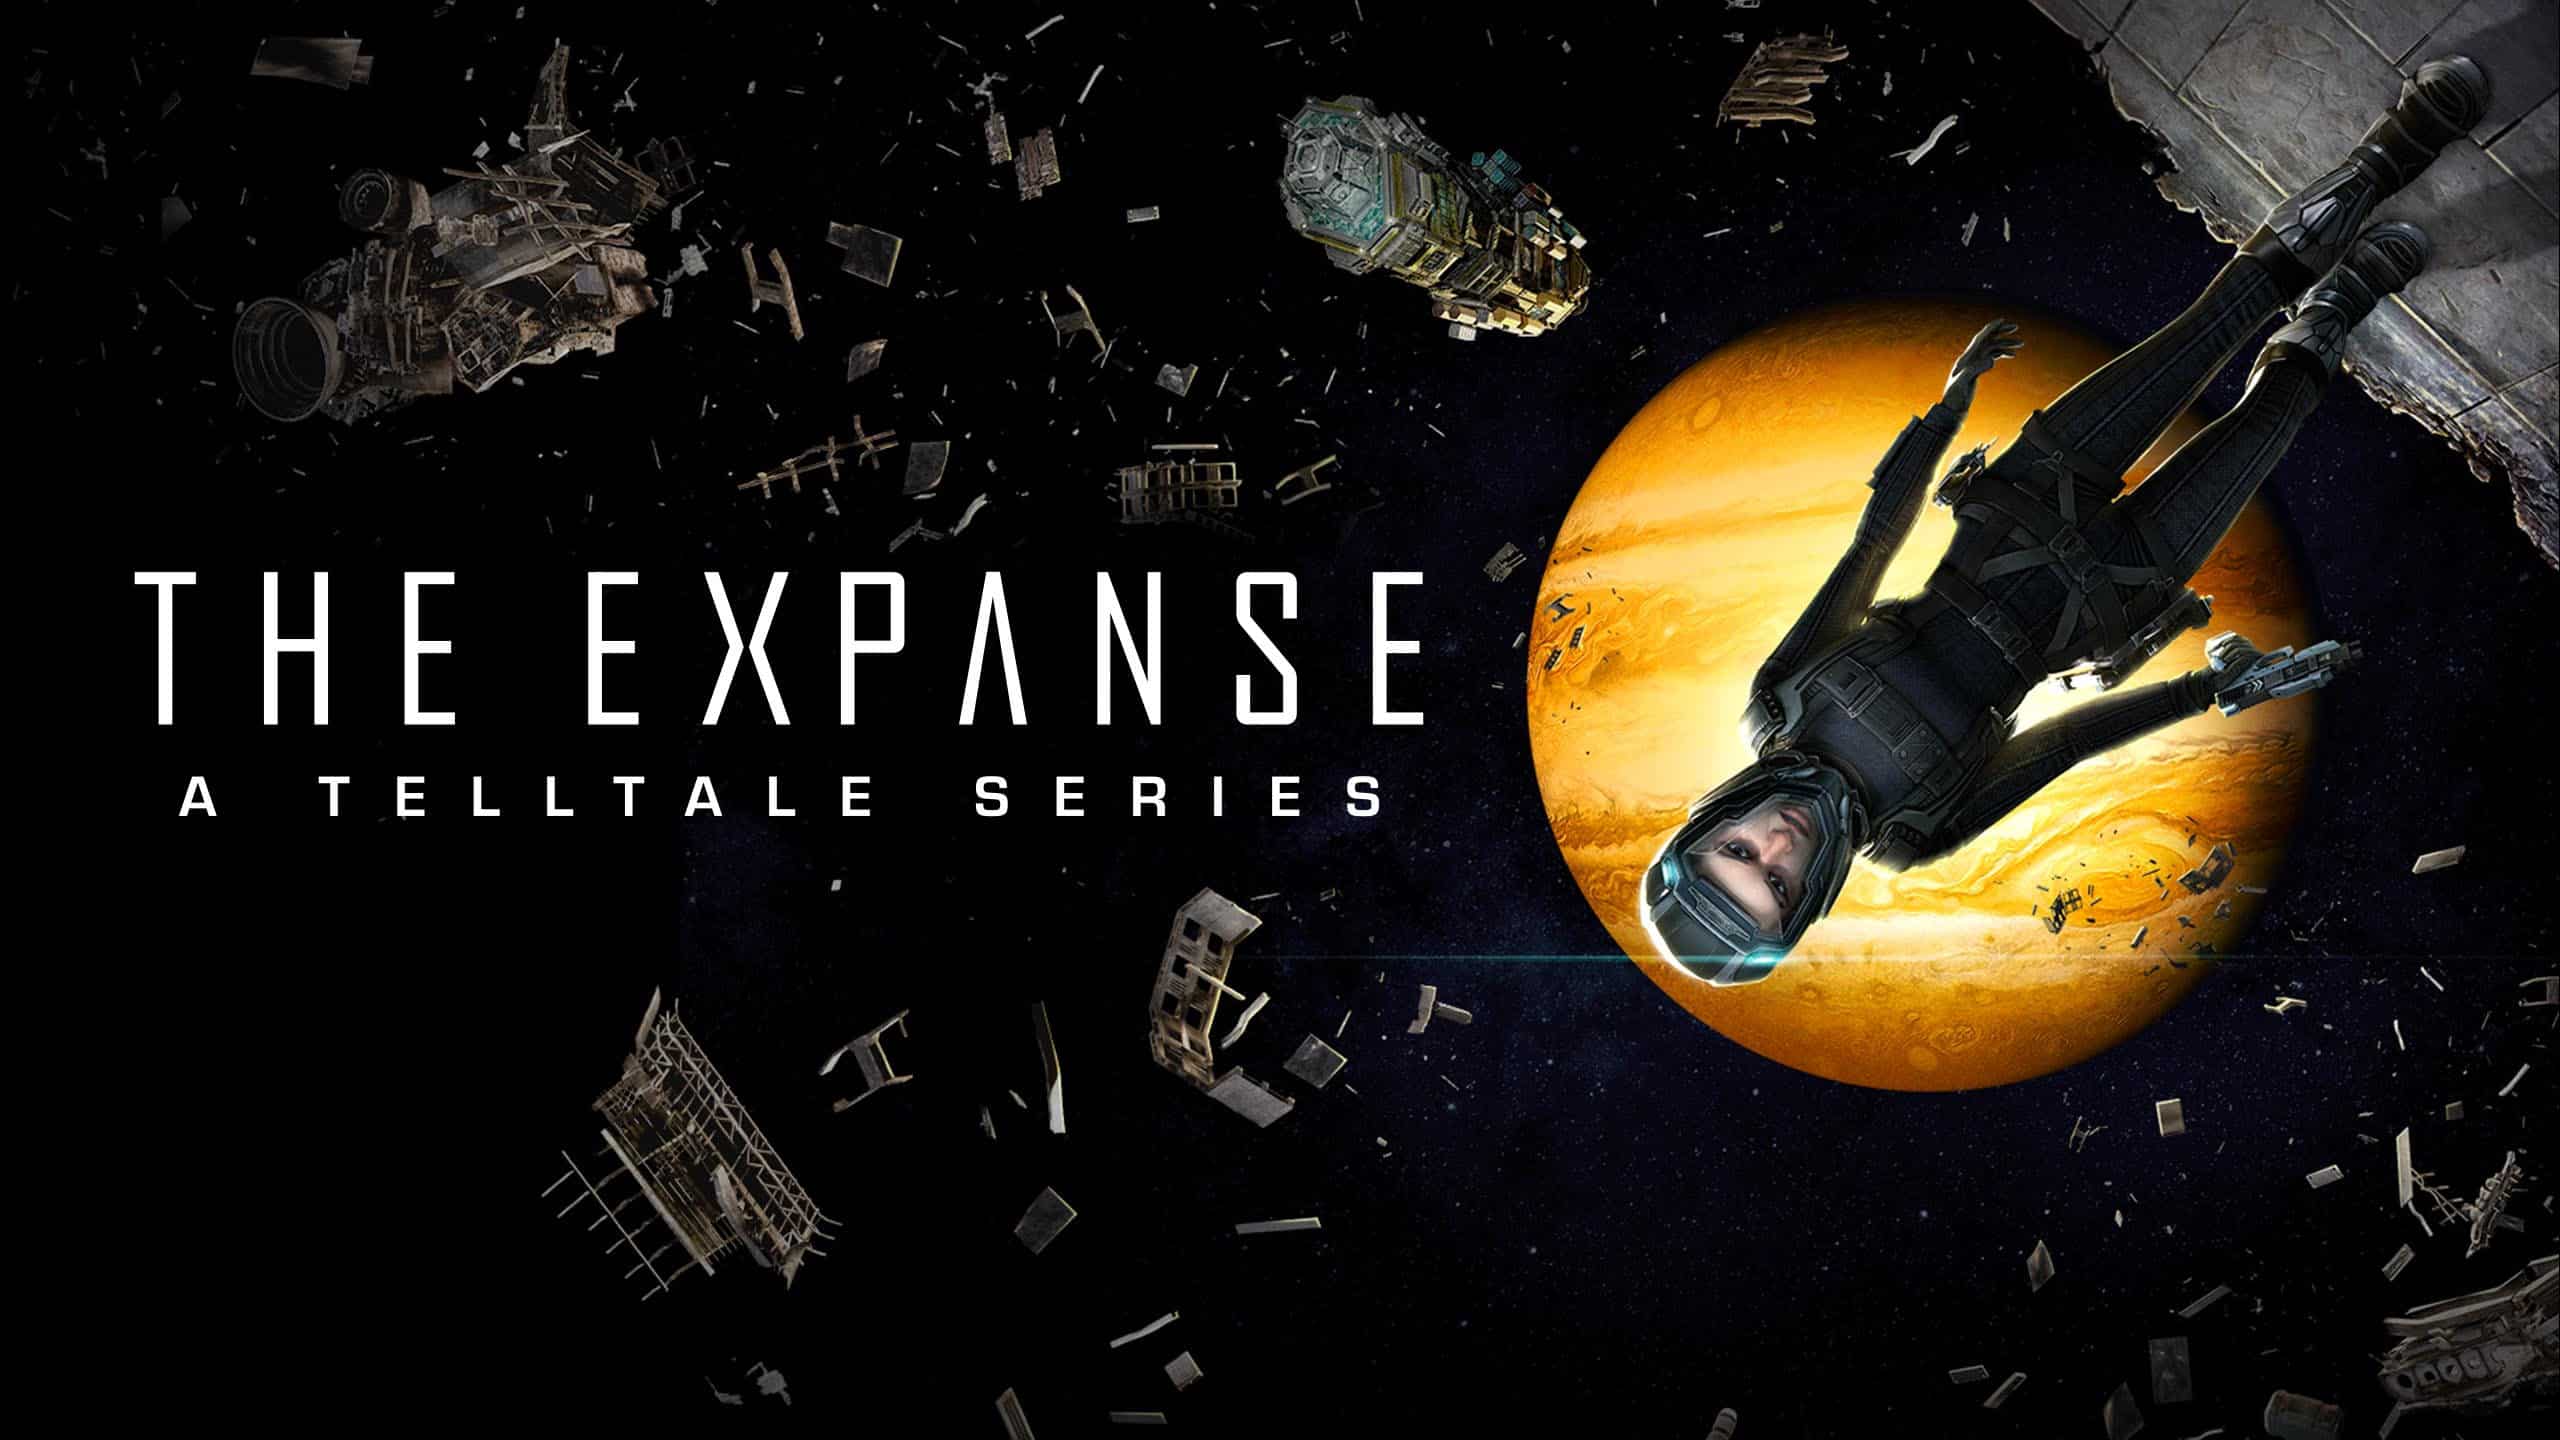 The Expanse: A Telltale Series Episode 1-6 Release Date